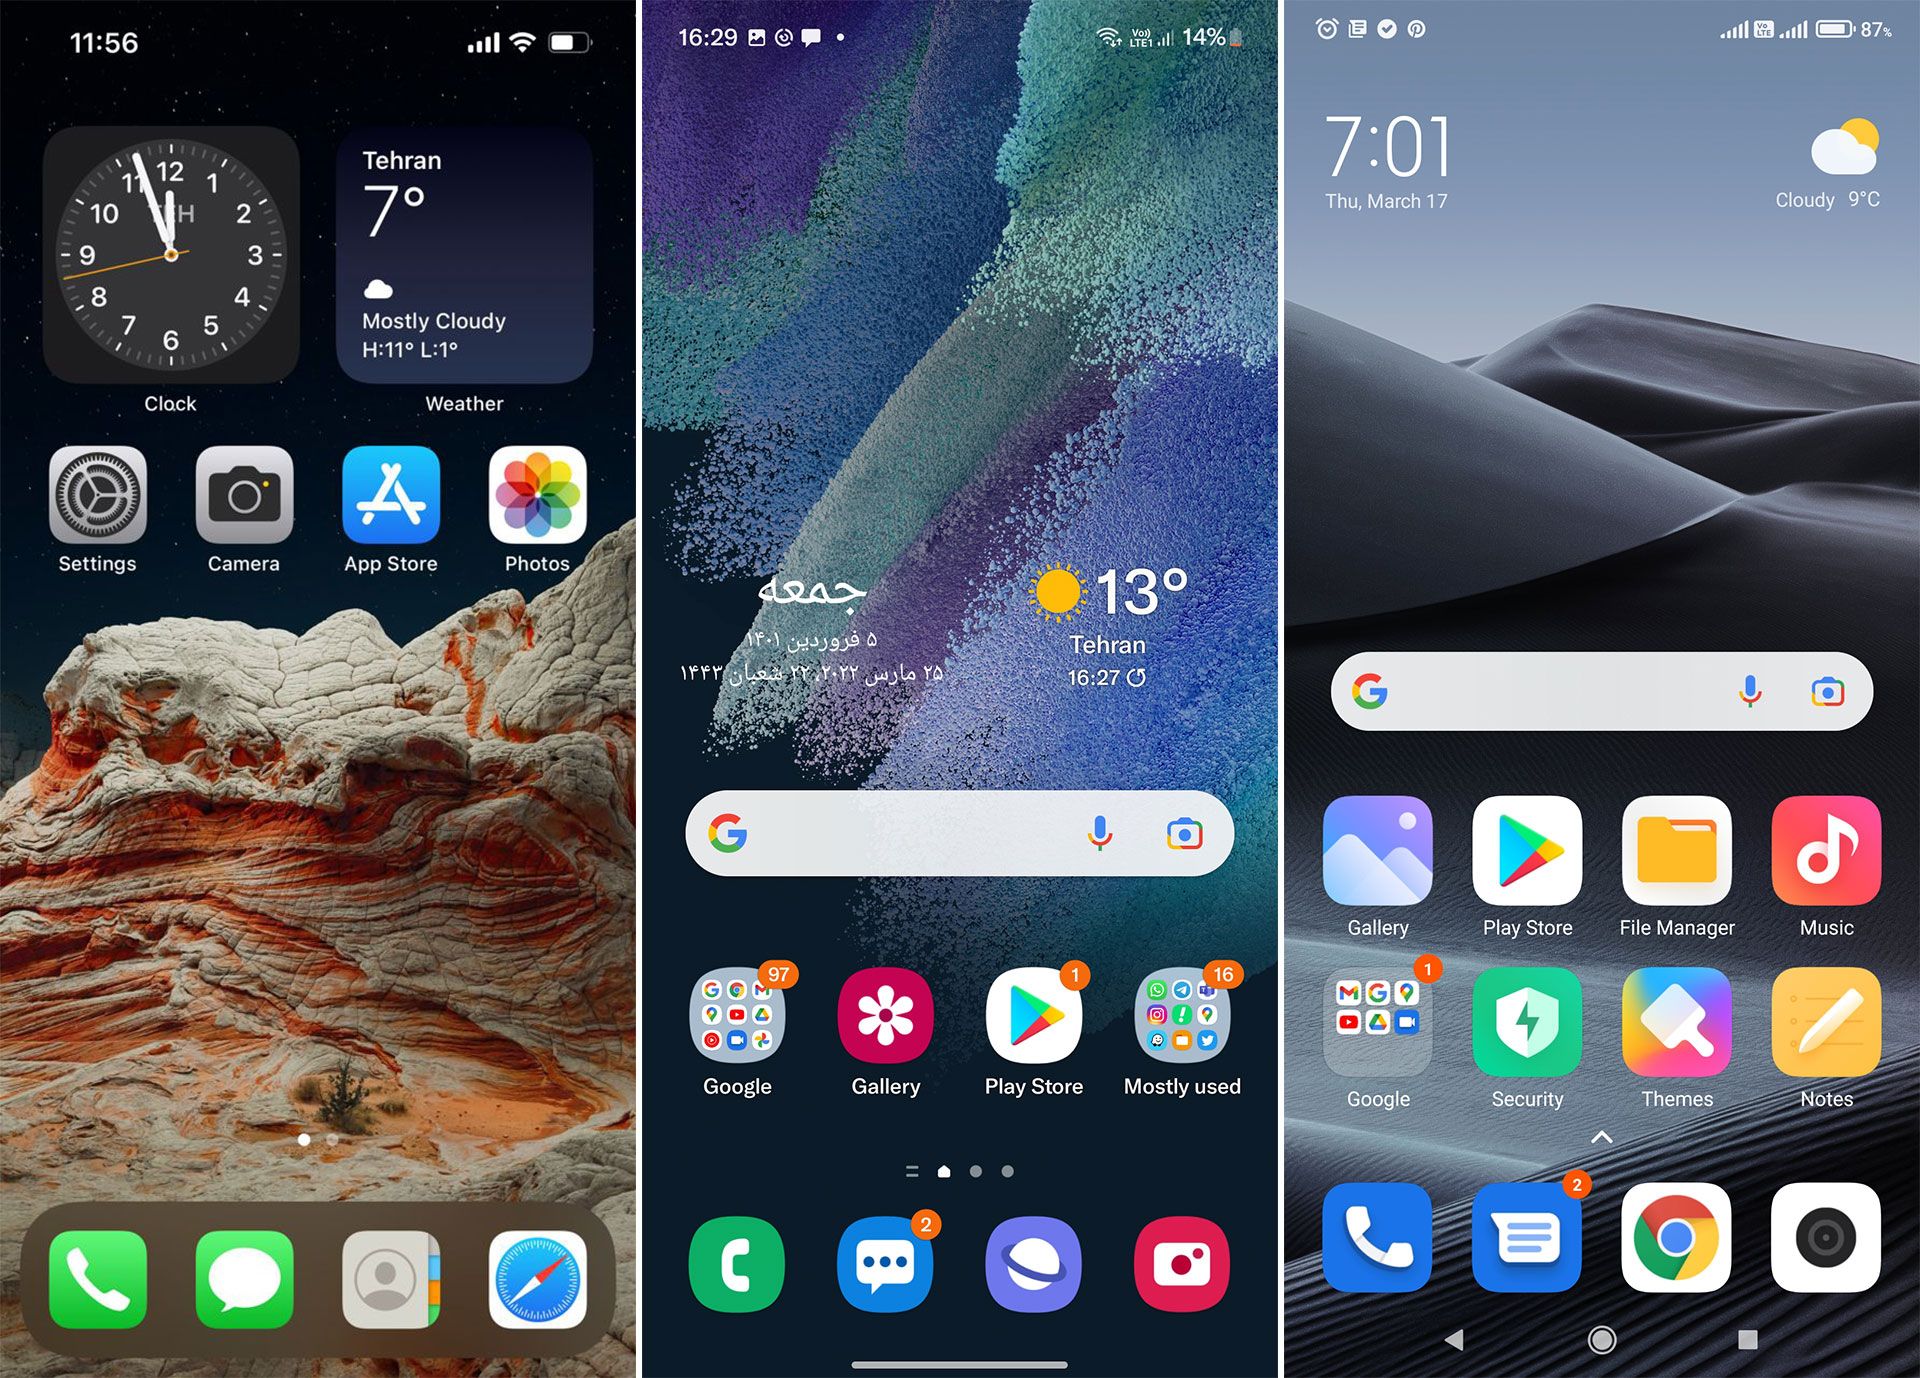 Home UI, MIUI and iOS user interface differences